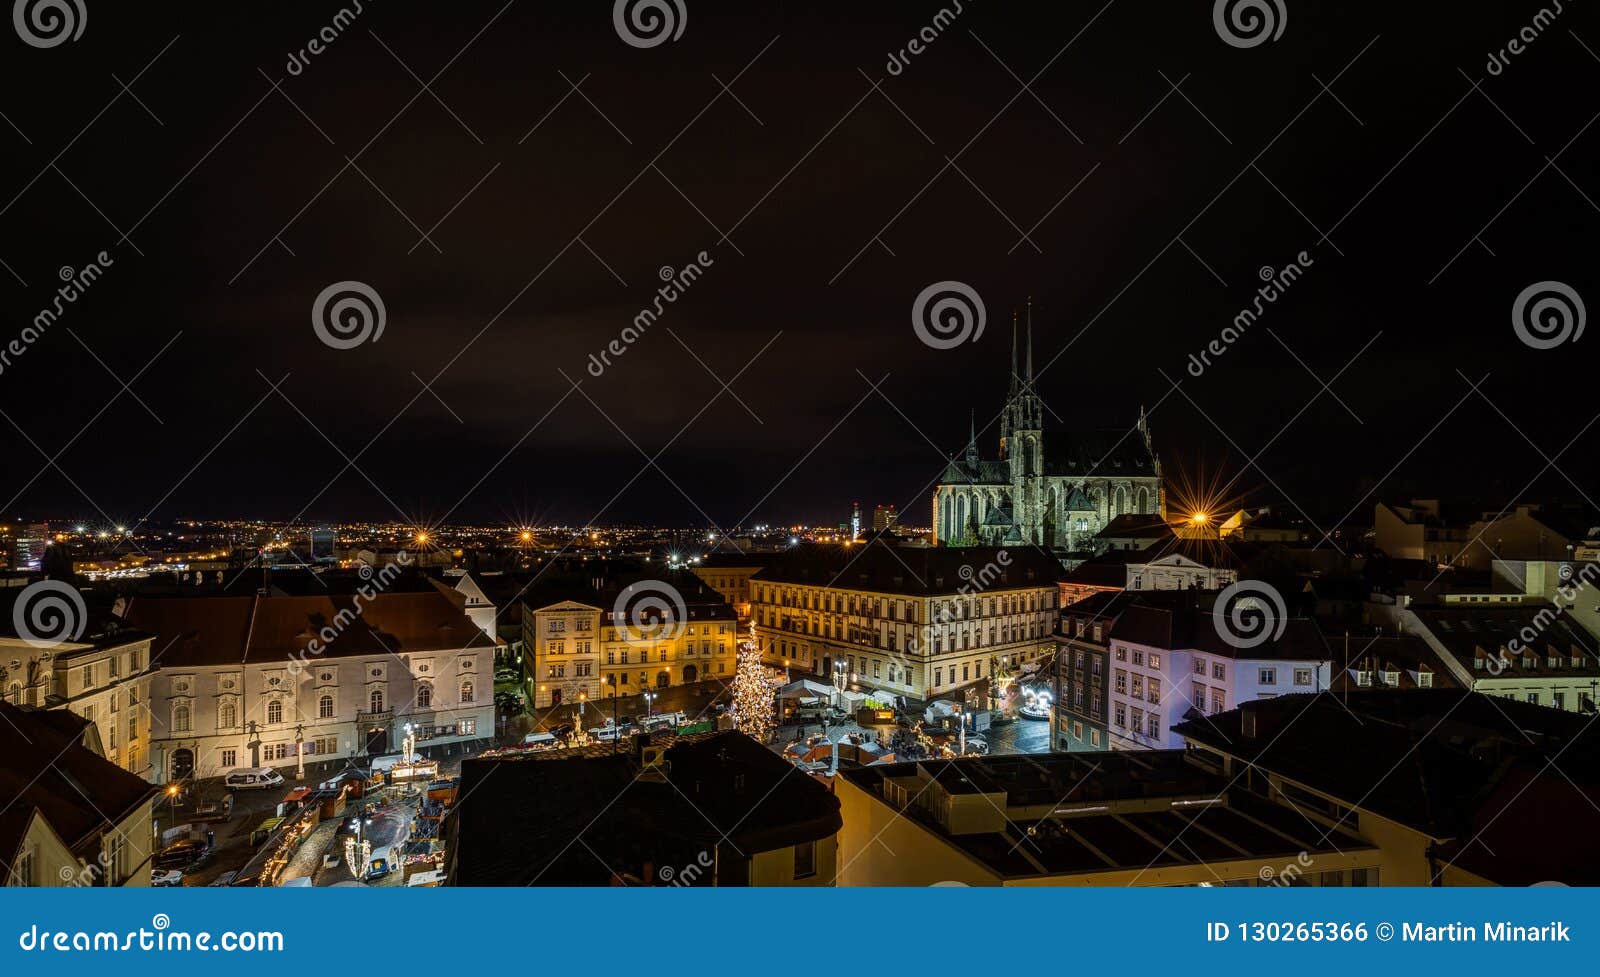 scenic view on chrismas brno center, zelny trh and cathedral of saint peter